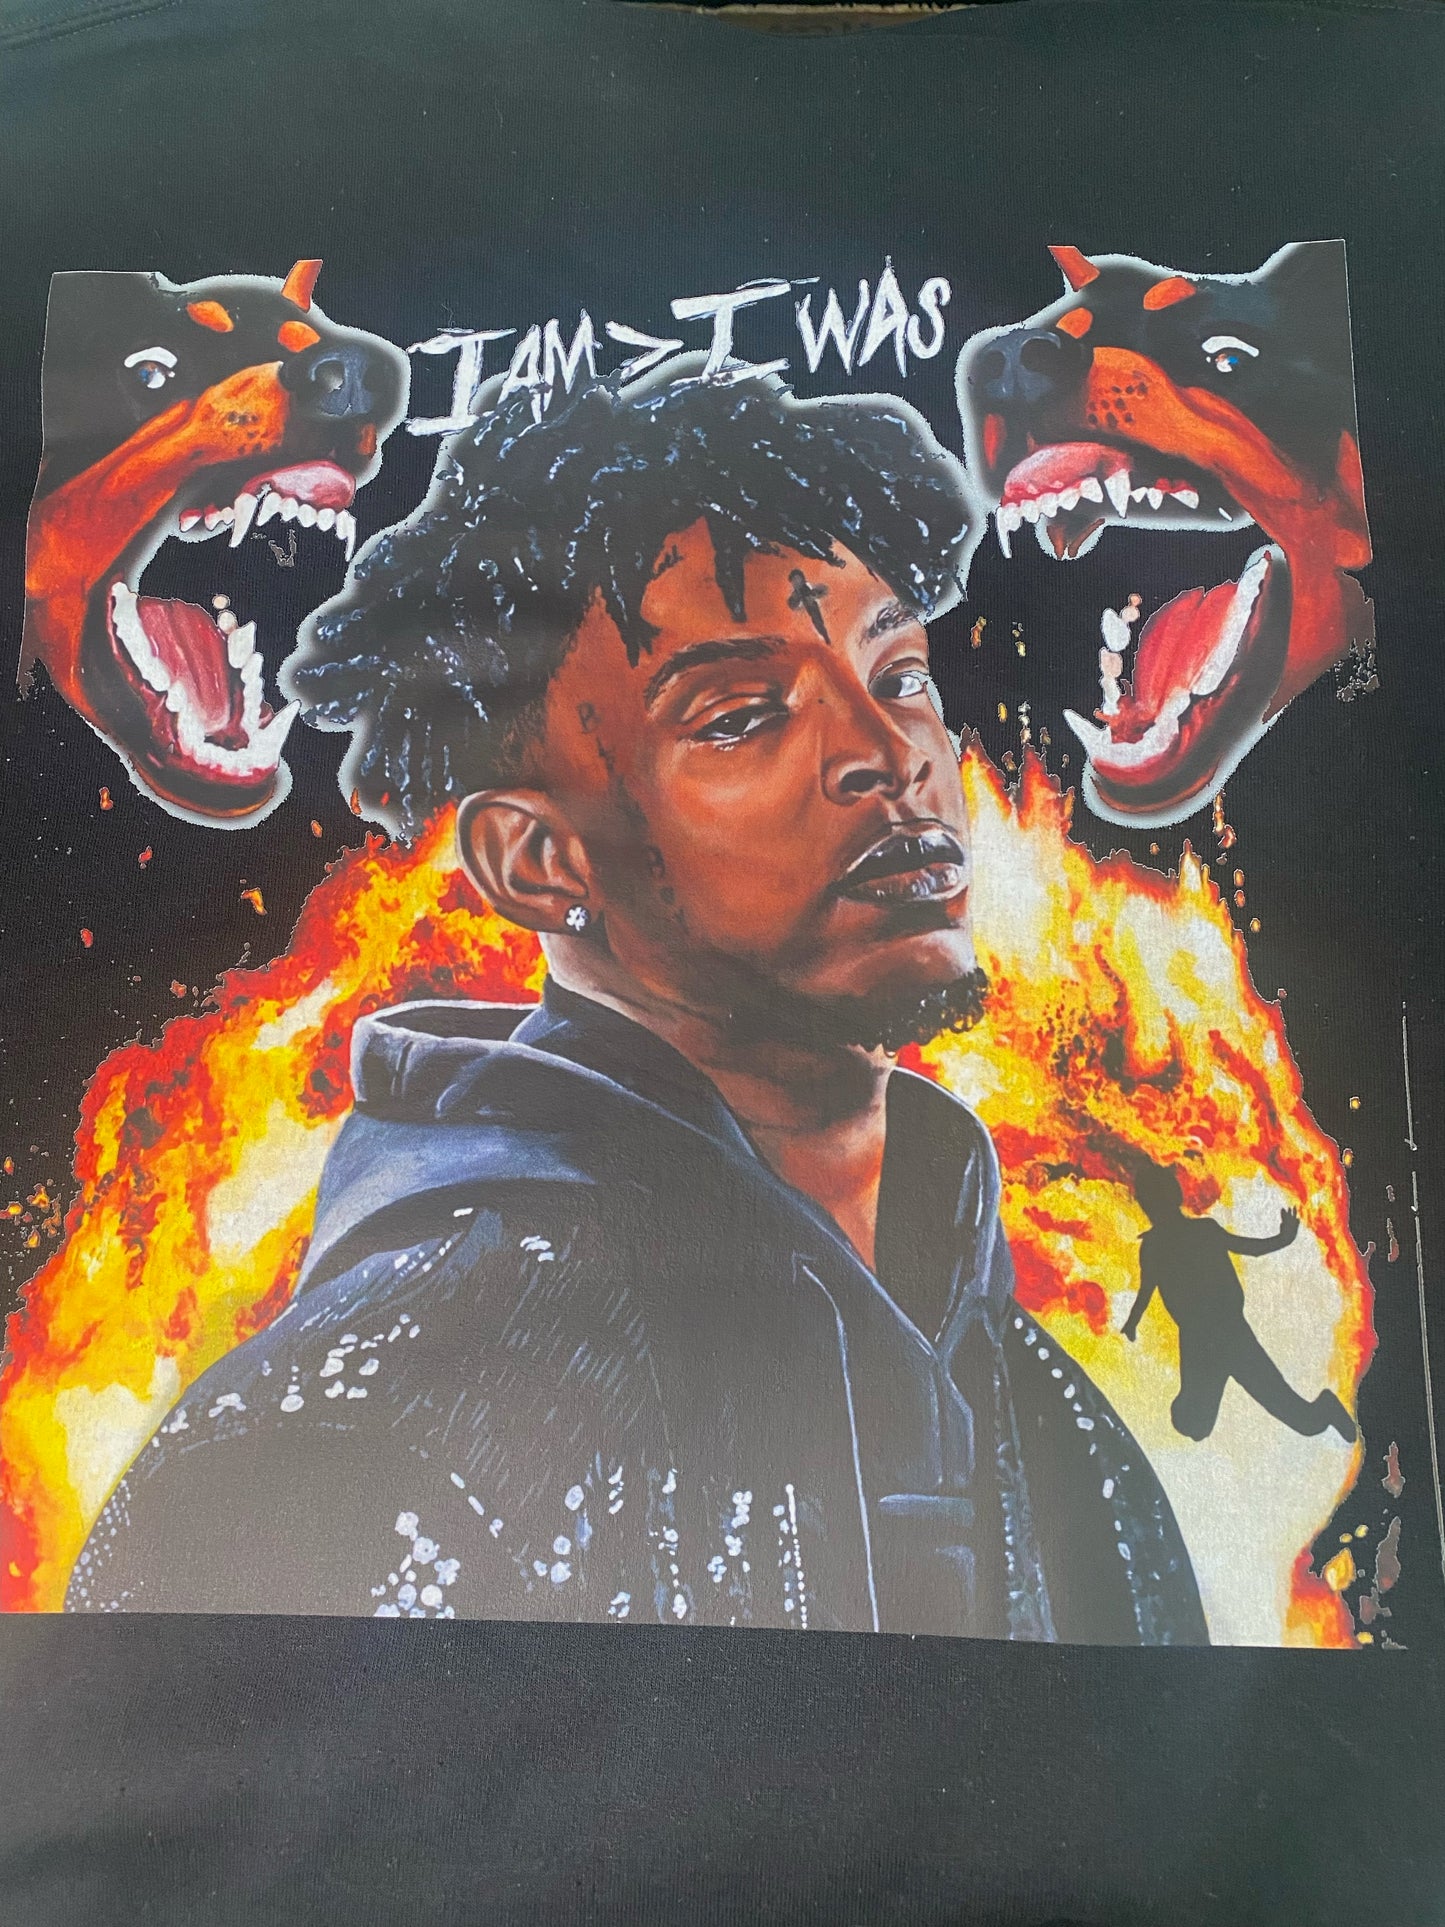 21 Savage embroider hoodie with back design